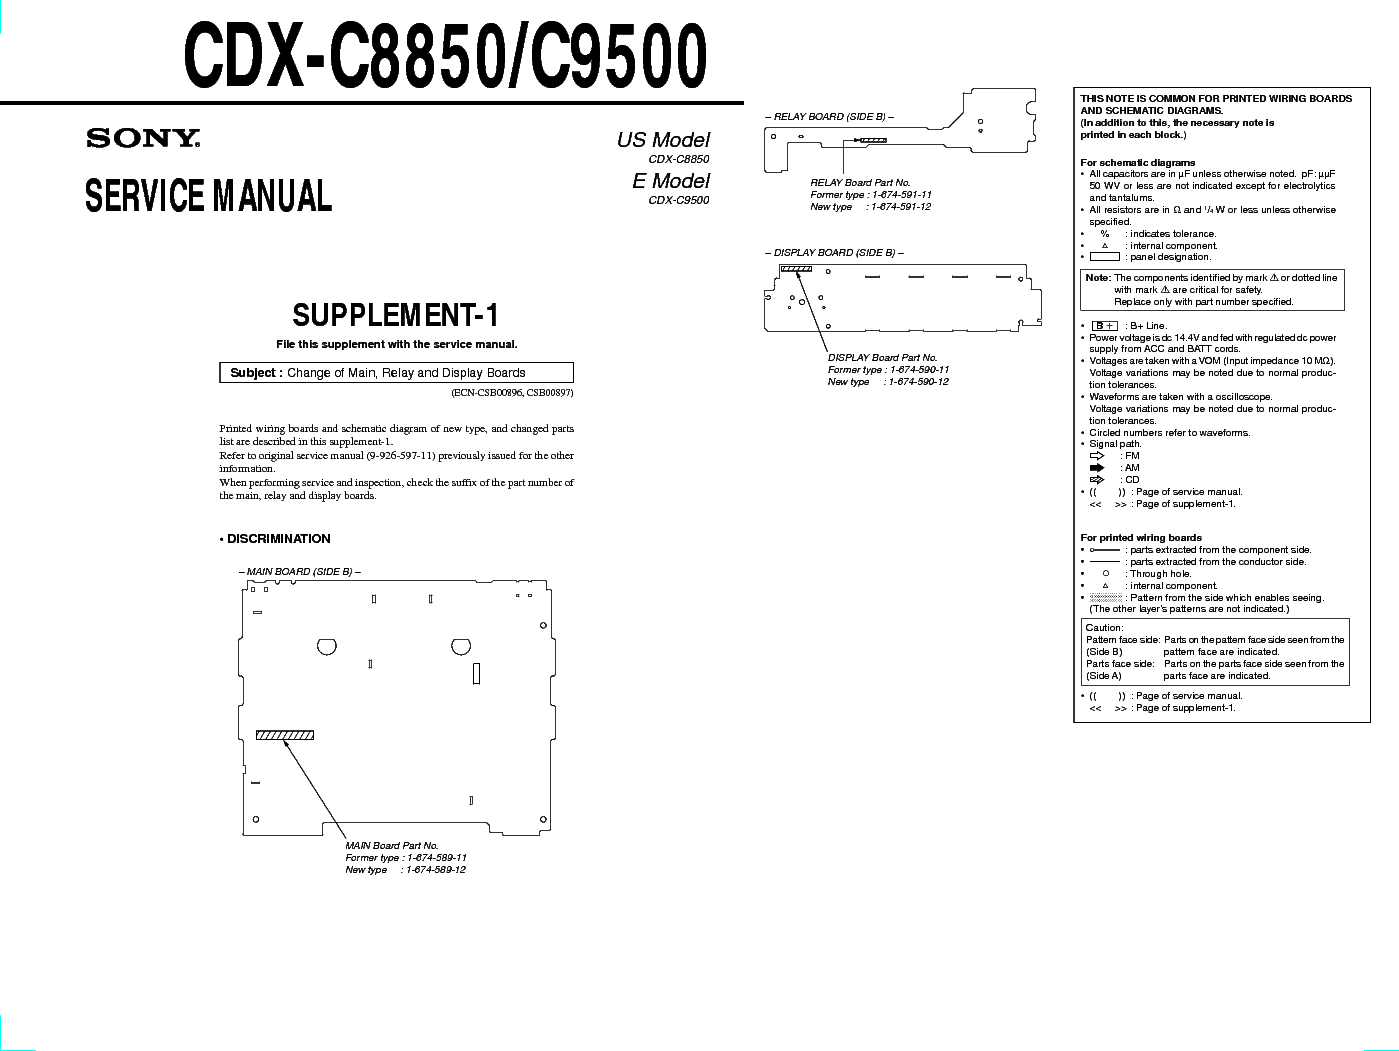 SONY CDX-C8850 C9500 SUPPLEMENT1 SM service manual (1st page)